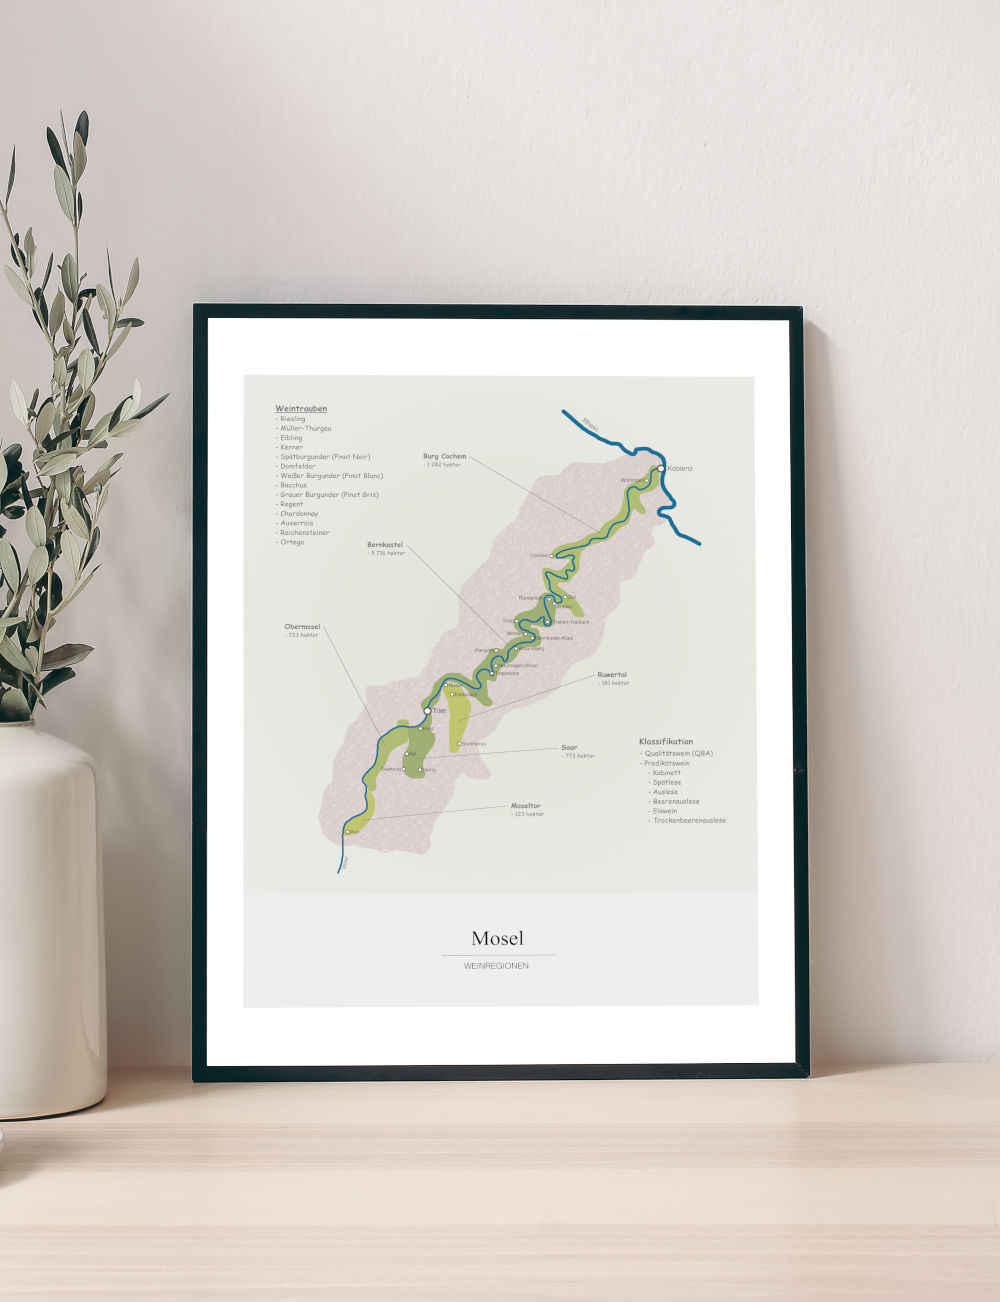 Picture Wine Map Moselle